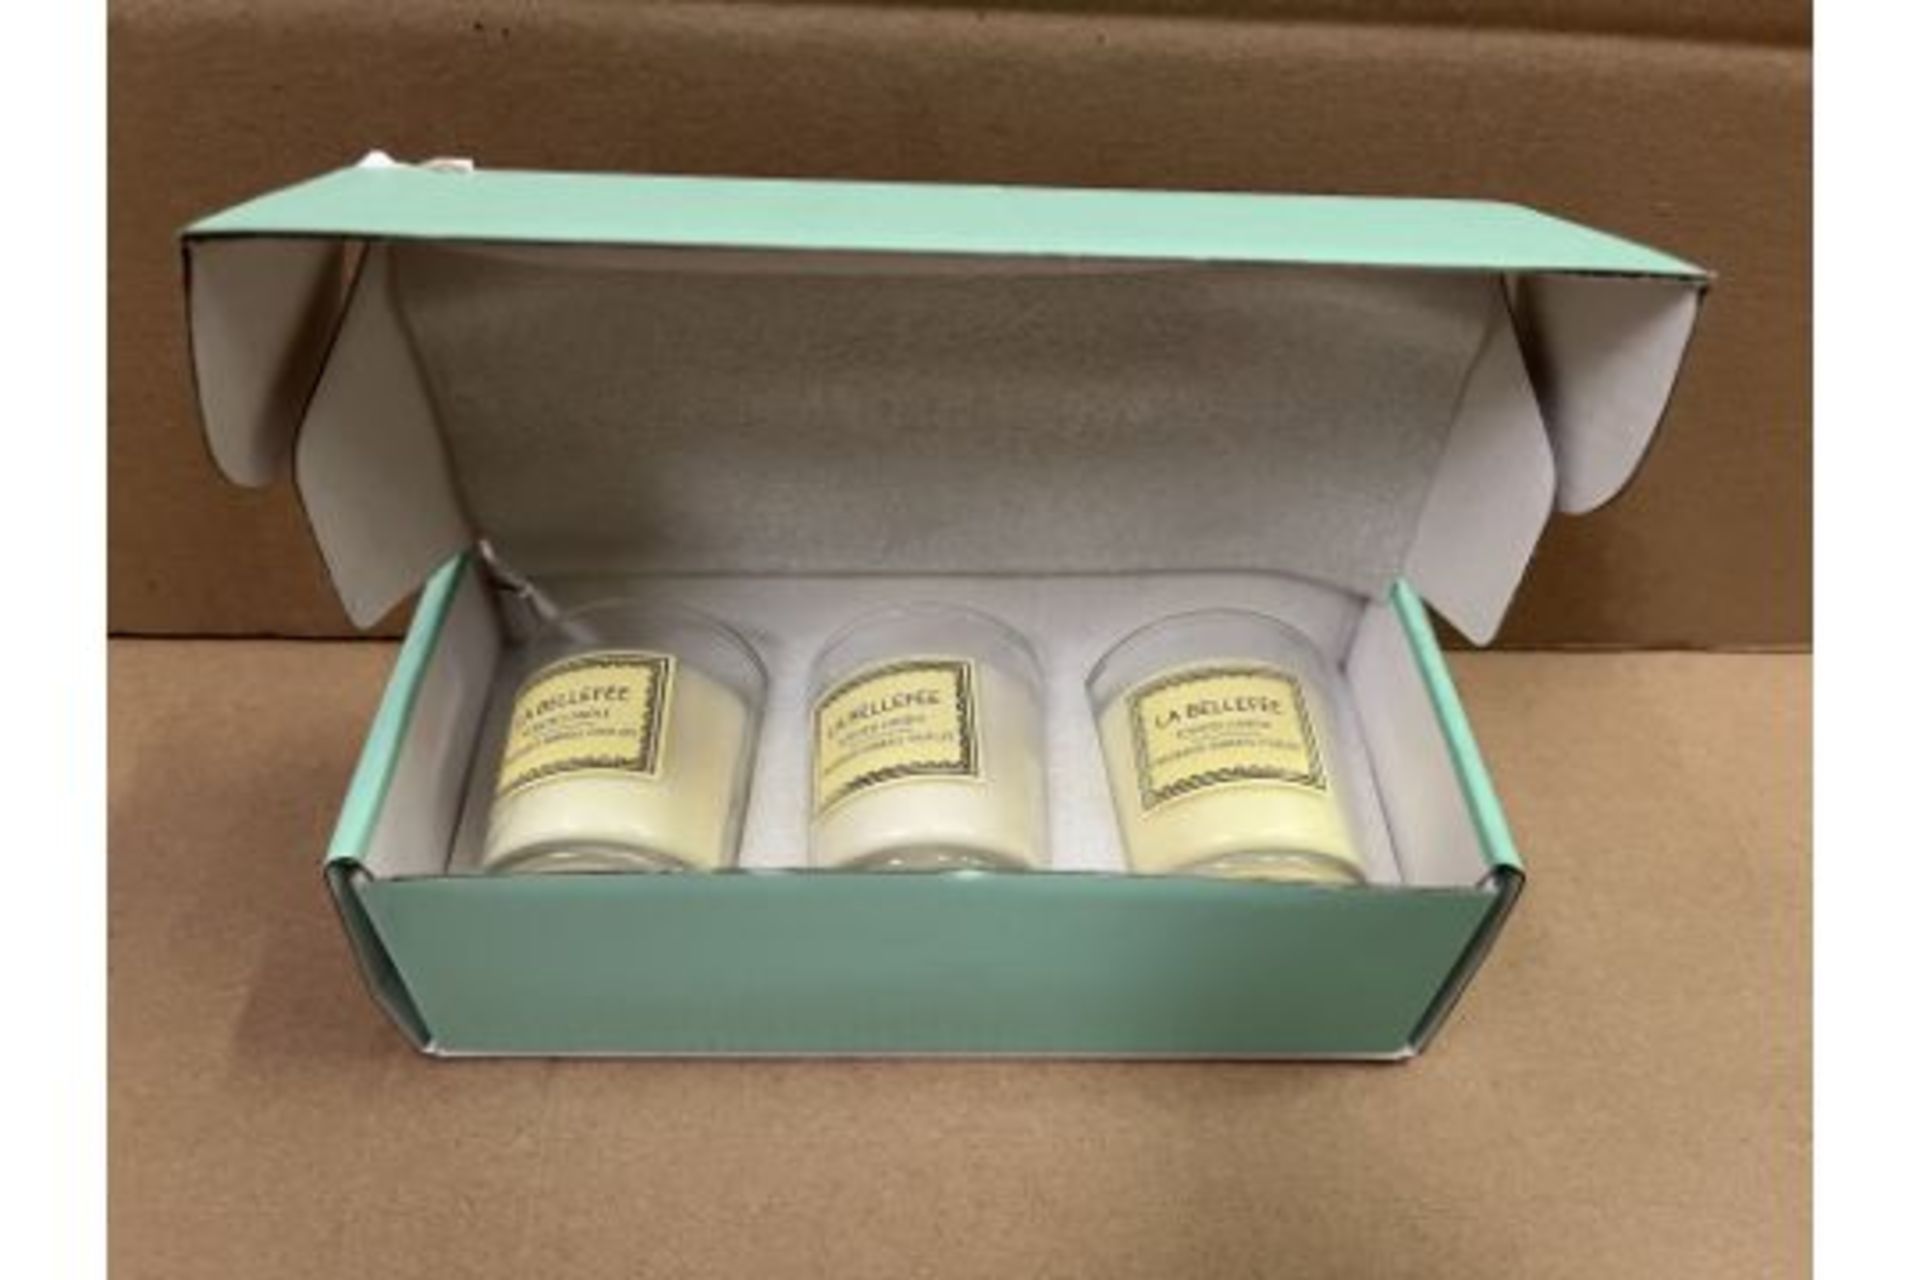 18 X BRAND NEW LA BELLEFEE 3 PIECE SCENTED CANDLE GIFT SETS S1-22